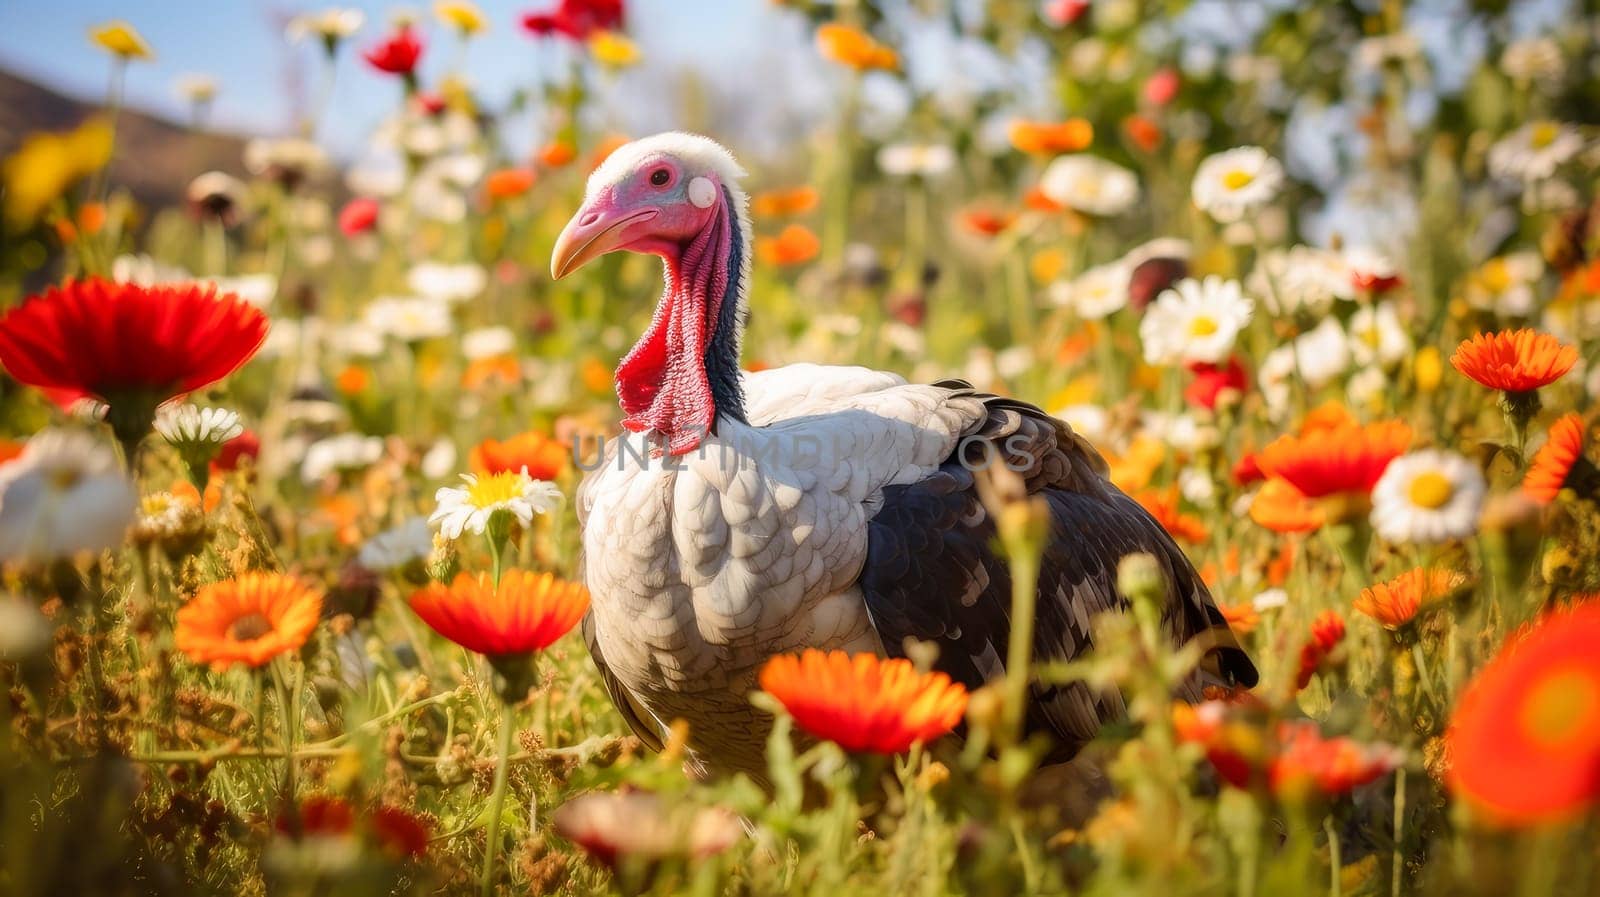 Cute, beautiful turkey in a field with flowers in nature, in the sun's rays. by Alla_Yurtayeva